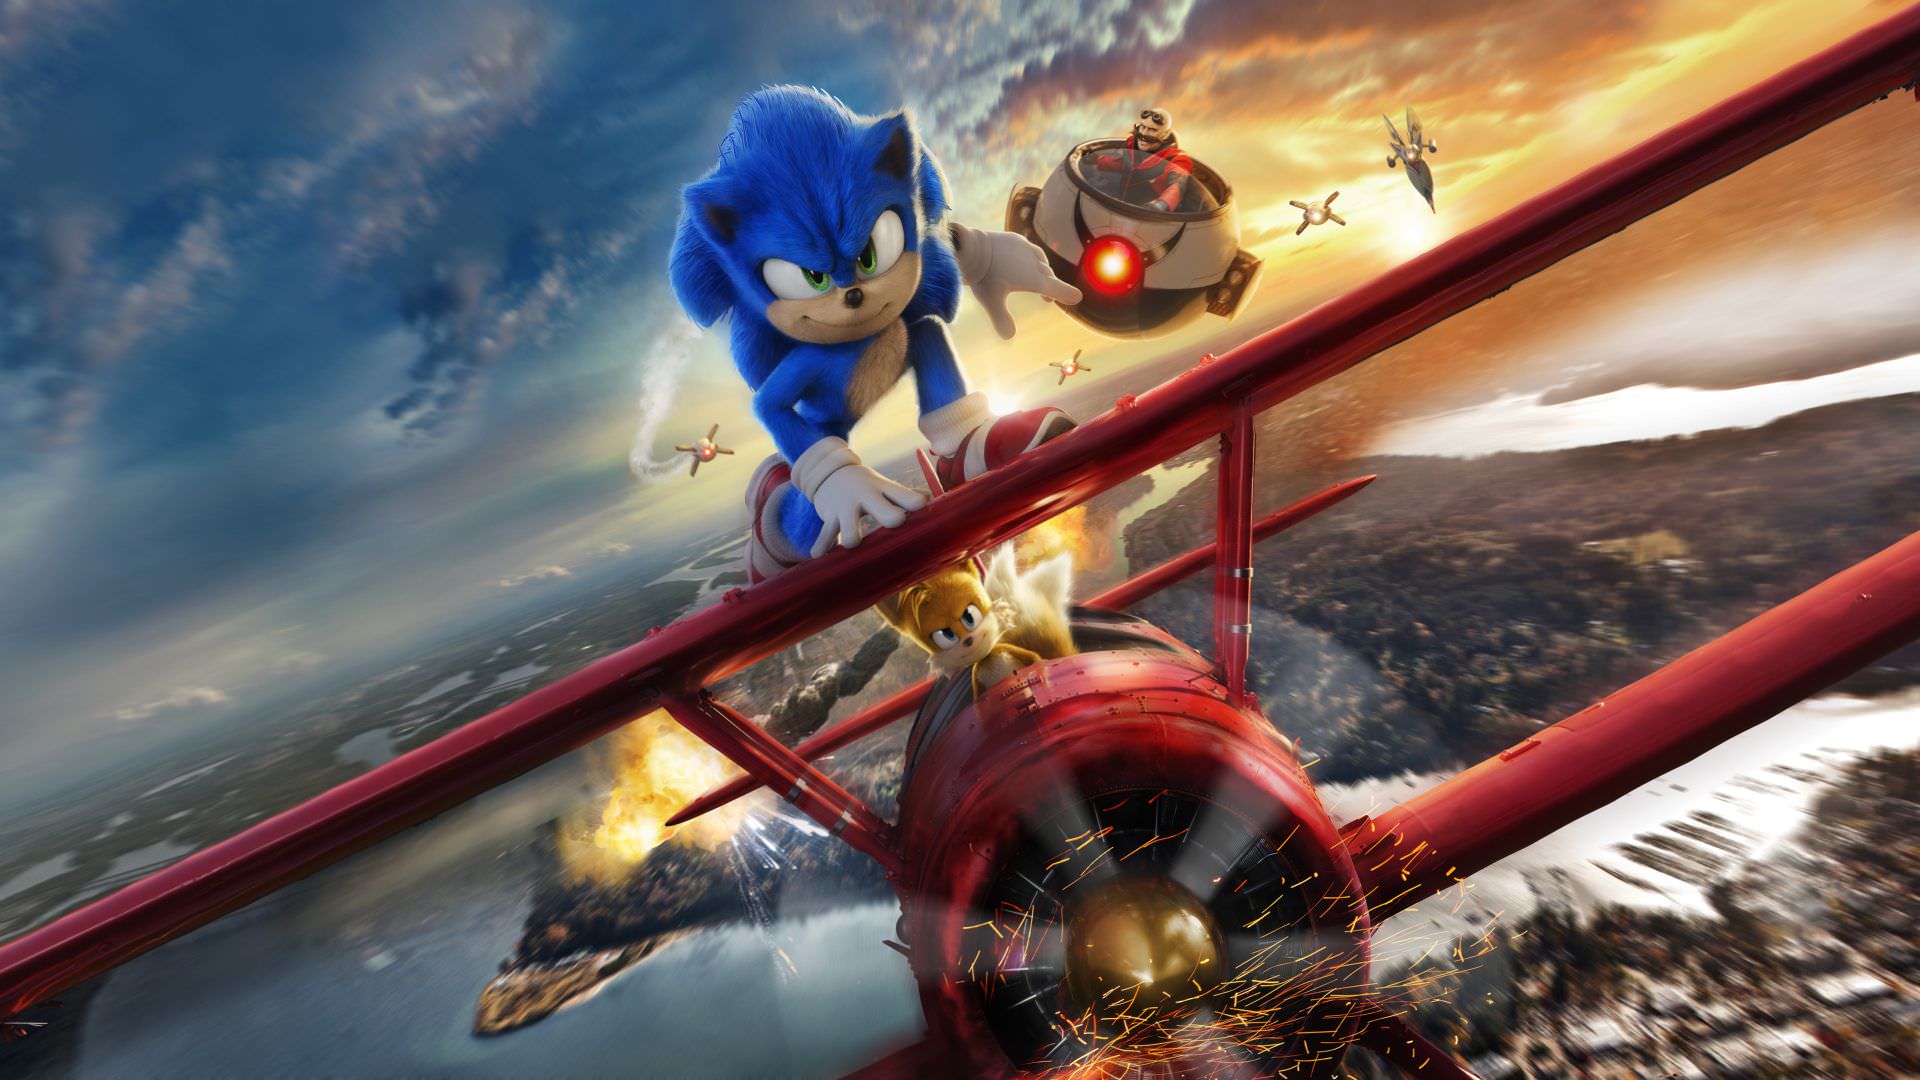 Widescreen version of the official Sonic the Hedgehog 2 movie poster